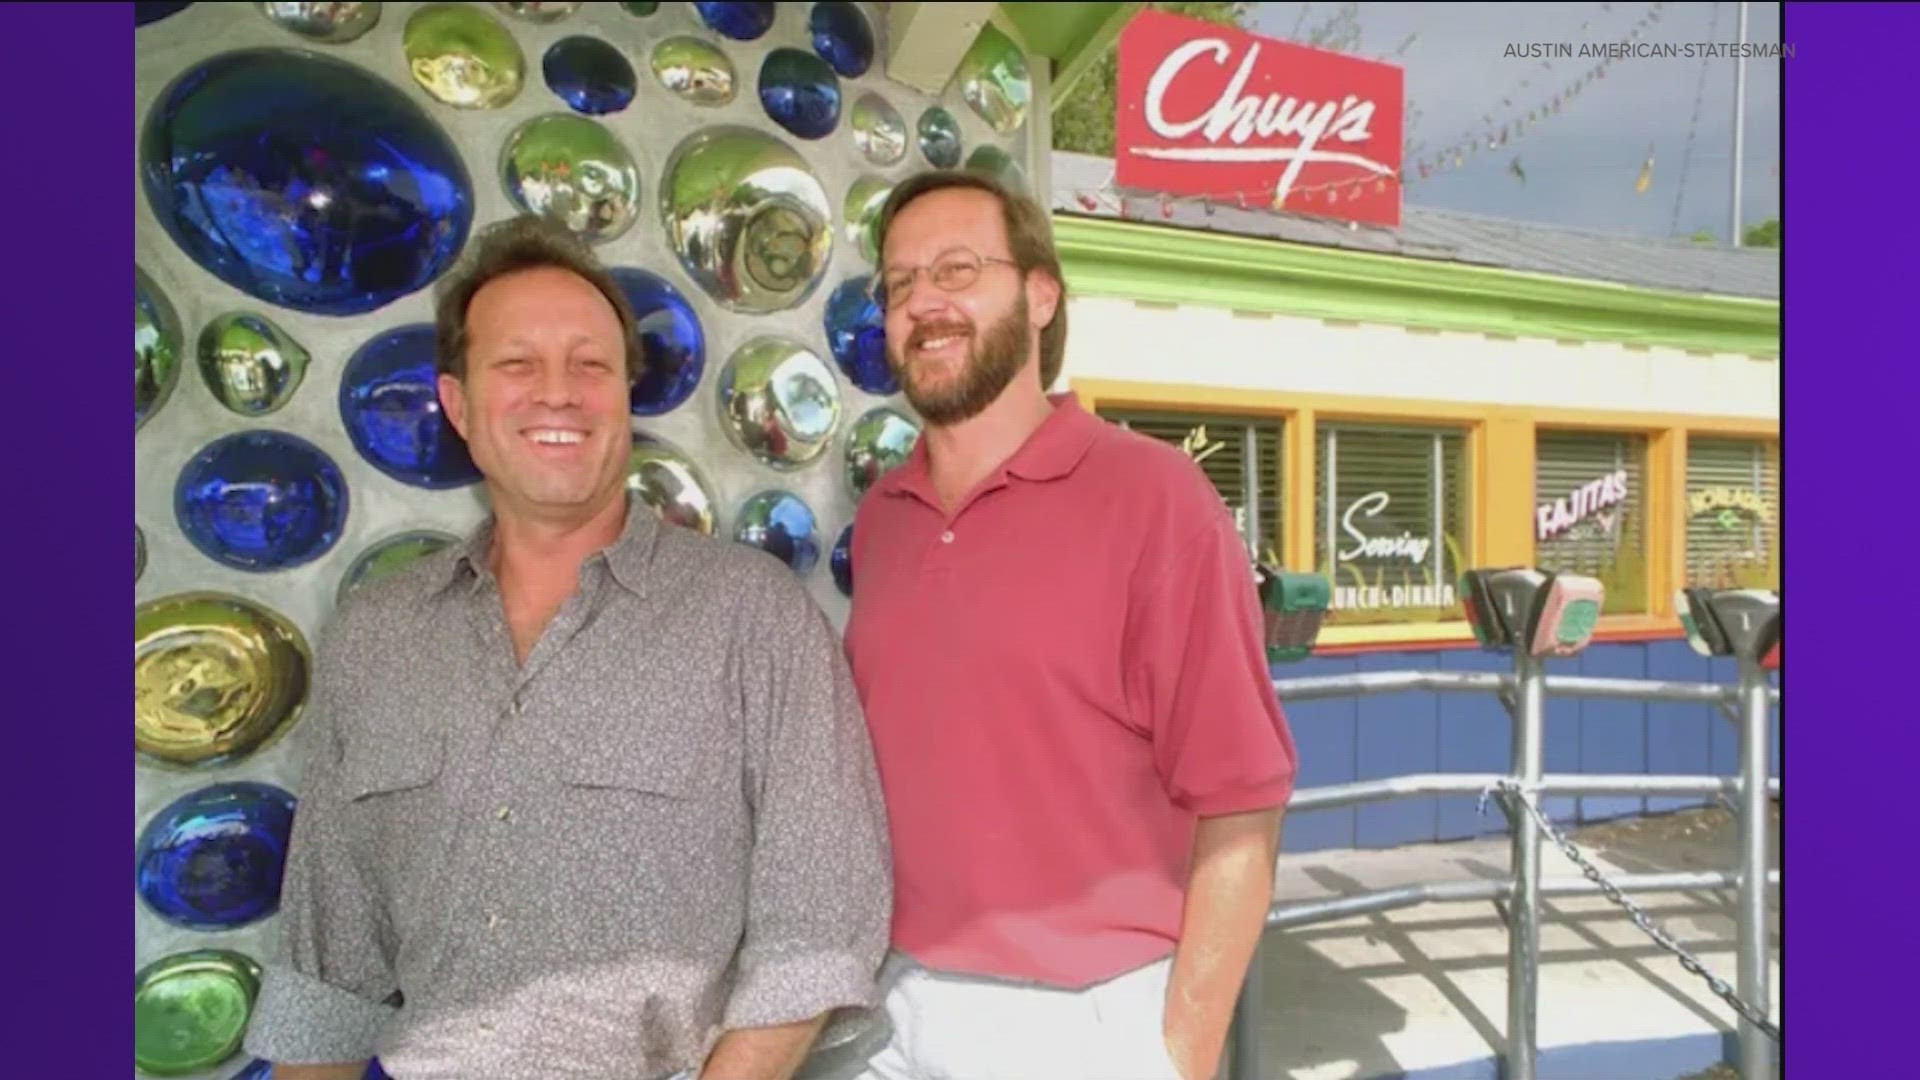 Mike Young founded the famous Tex-Mex restaurant on Barton Springs Road in 1982 with partner John Zapp.